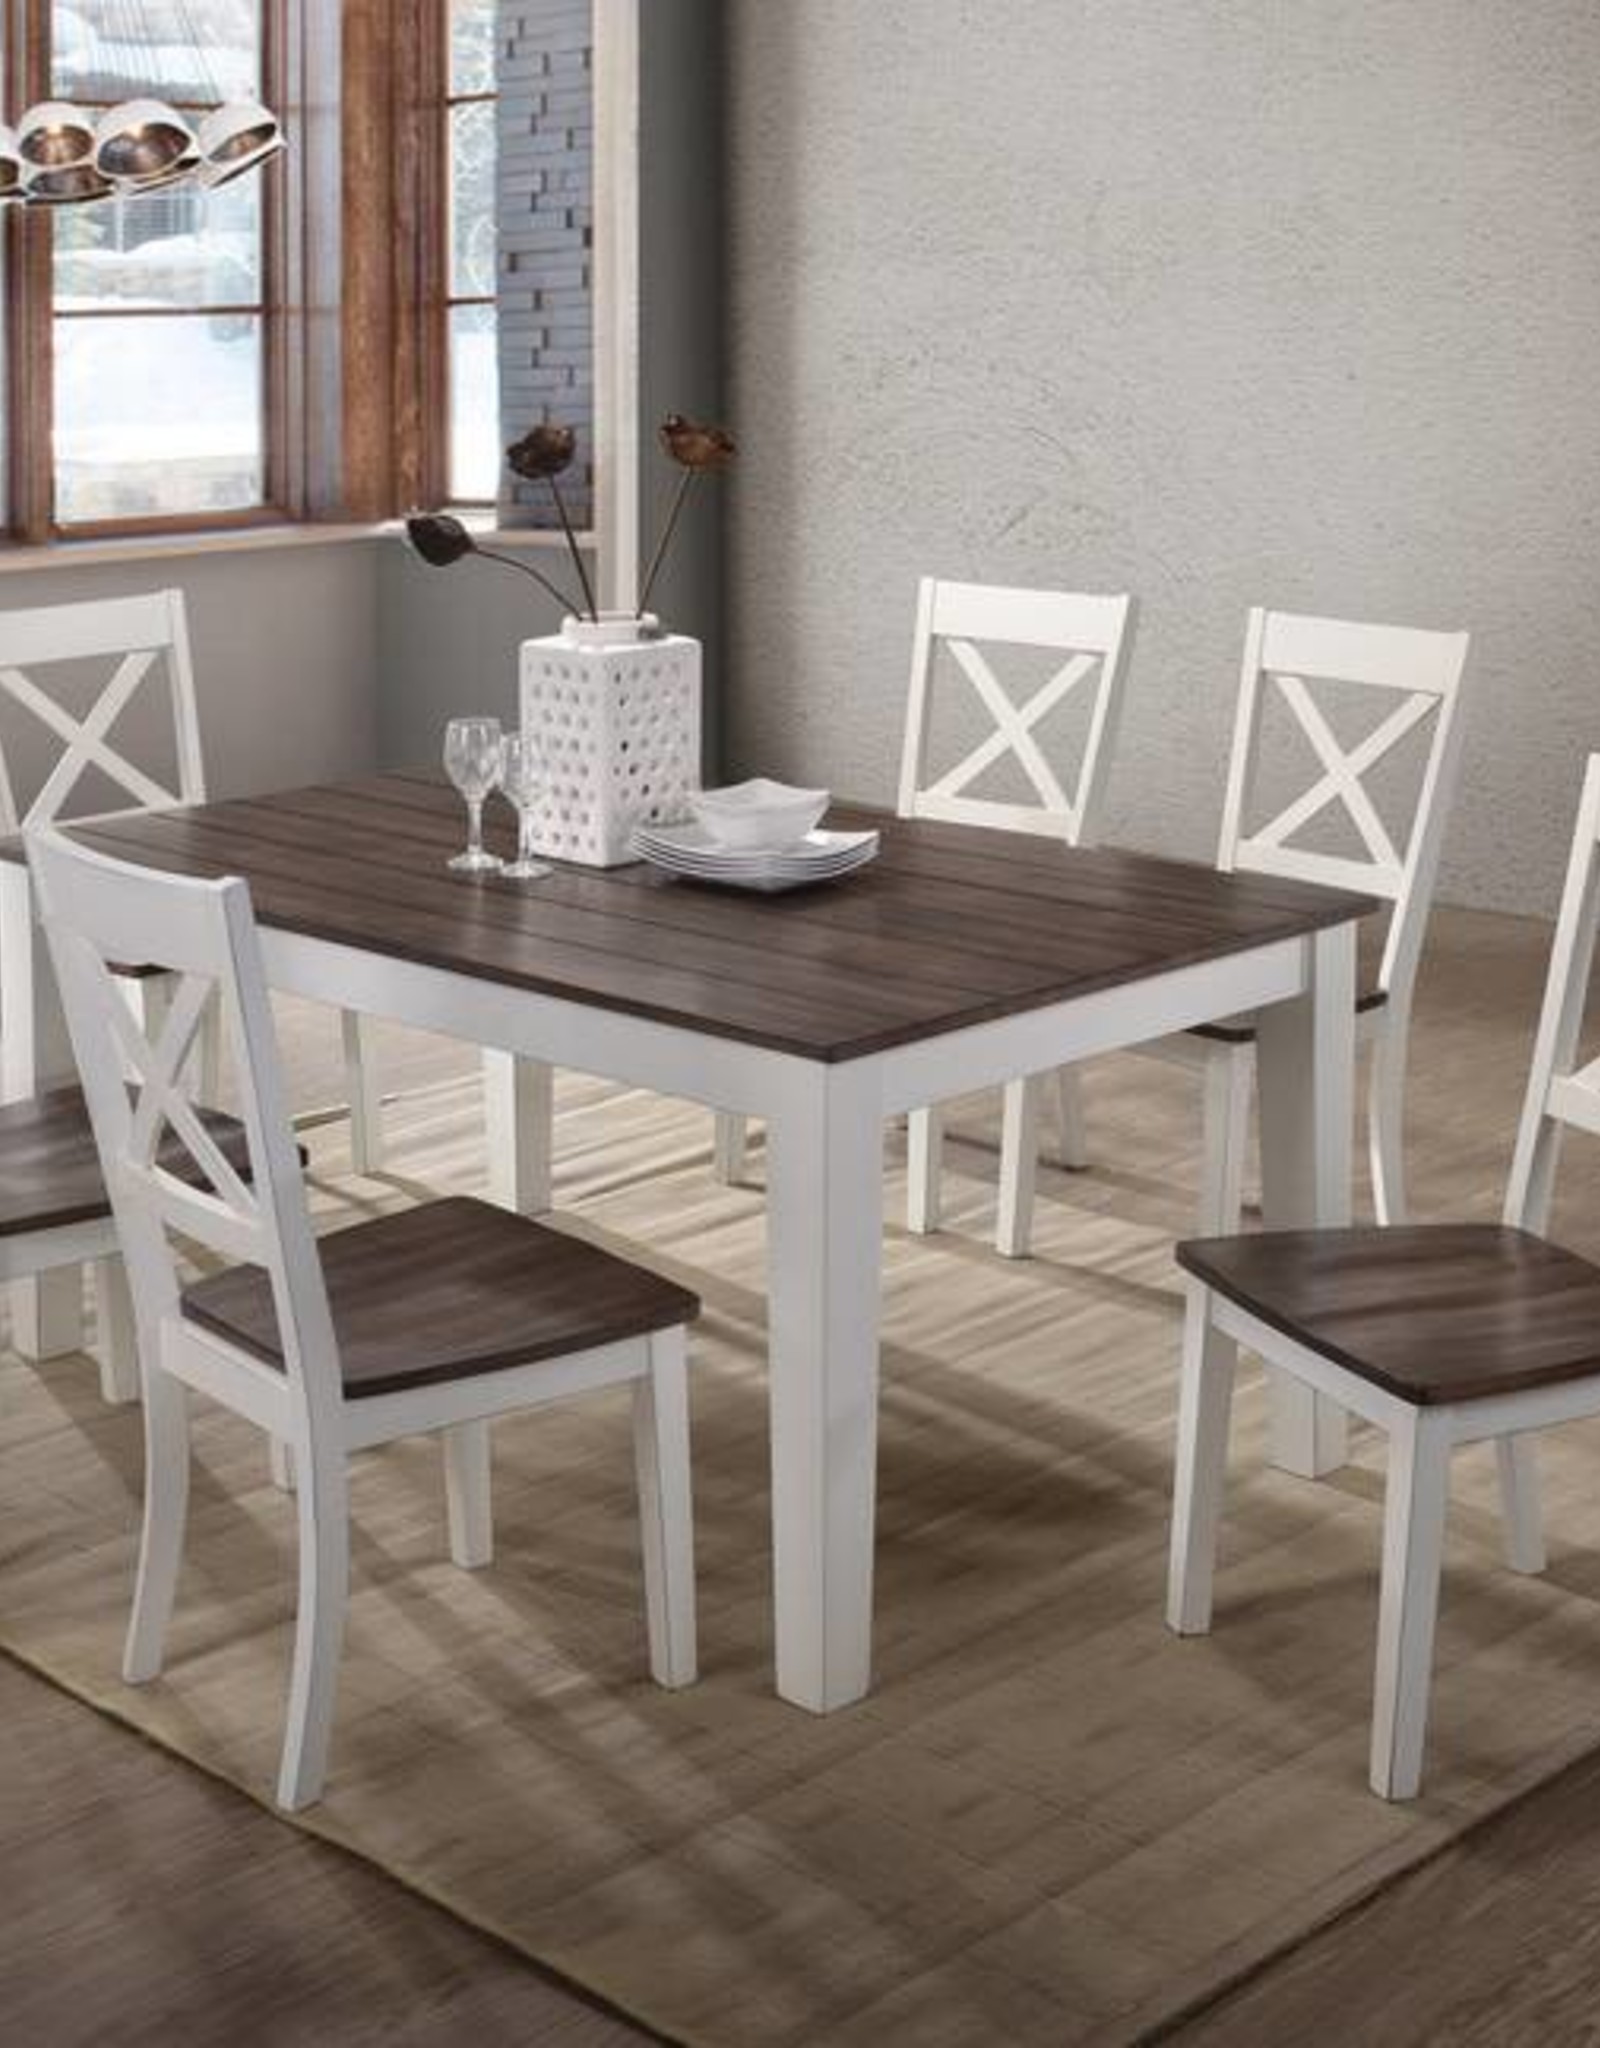 A La Carte Rectangular Farmhouse Dining, How Long Is A Table With 6 Chairs